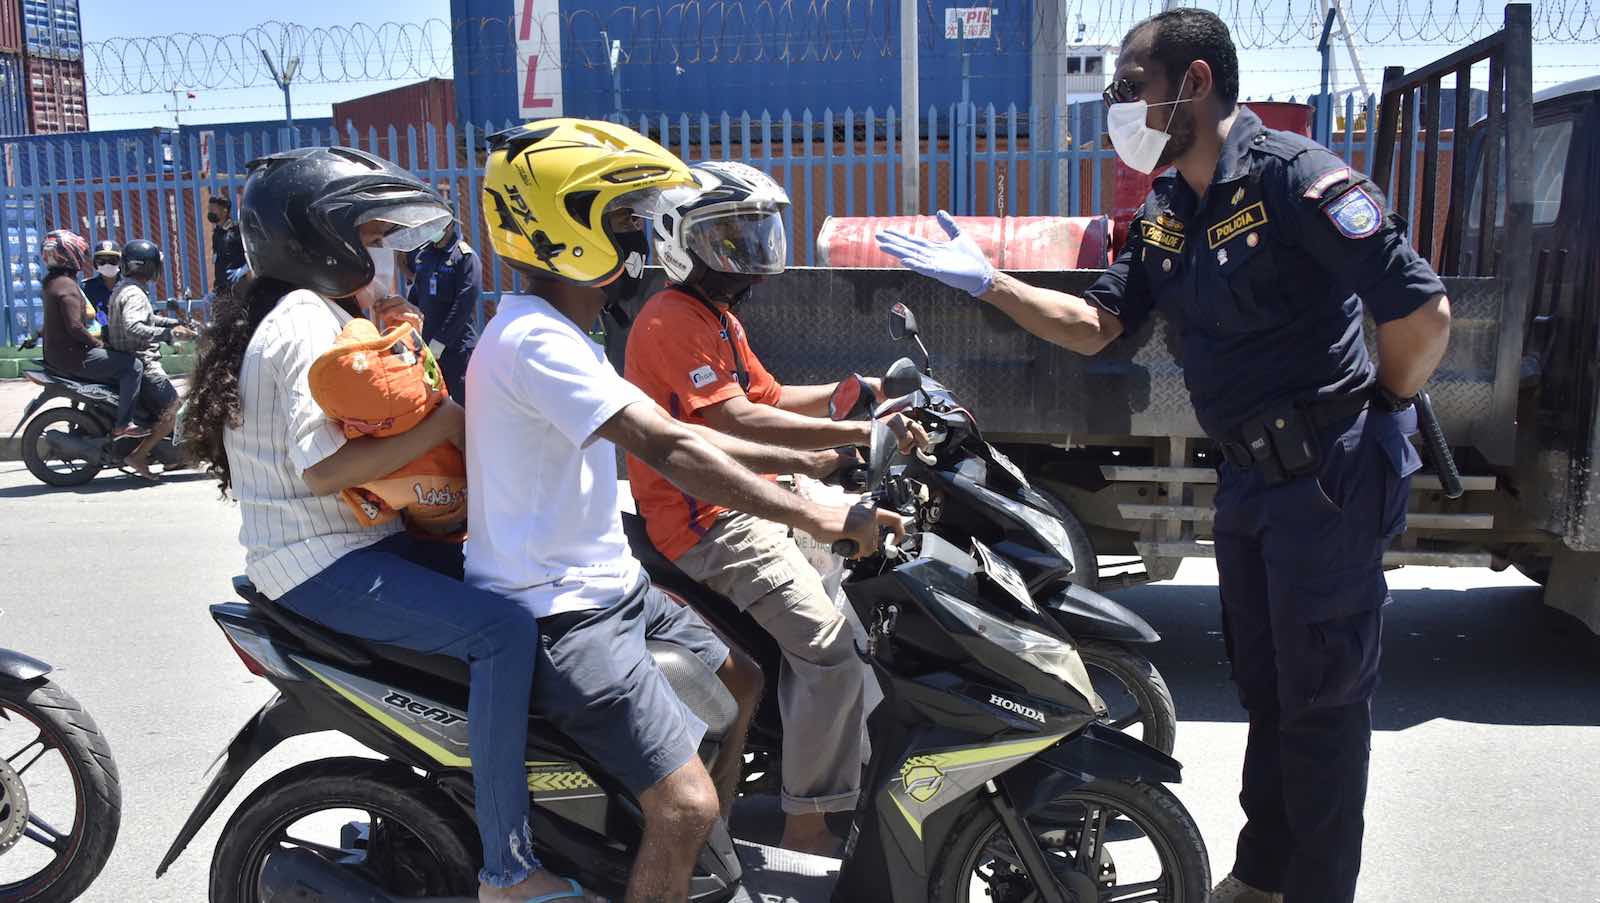 A policeman in Dili asks motorists to carry only one person per bike to ensure social distancing amid Covid-19 concerns (Valentino Dariell De Sousa/AFP/Getty Images)